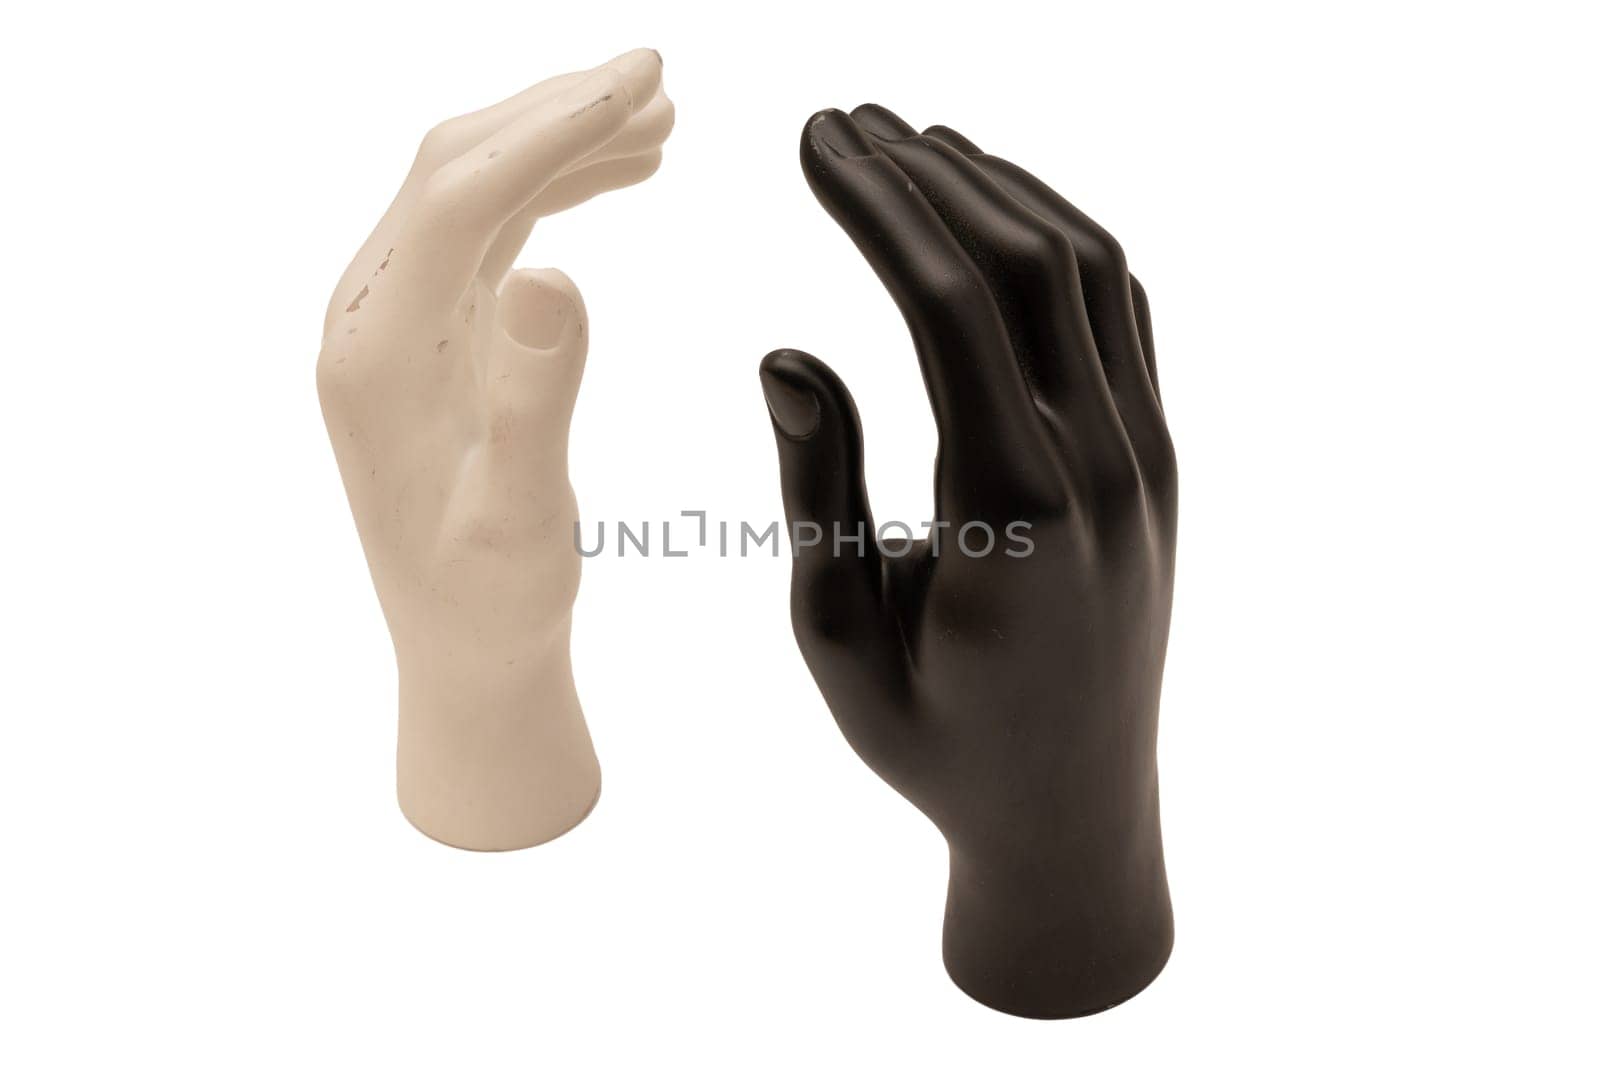 Old shabby mannequin hands on a white background